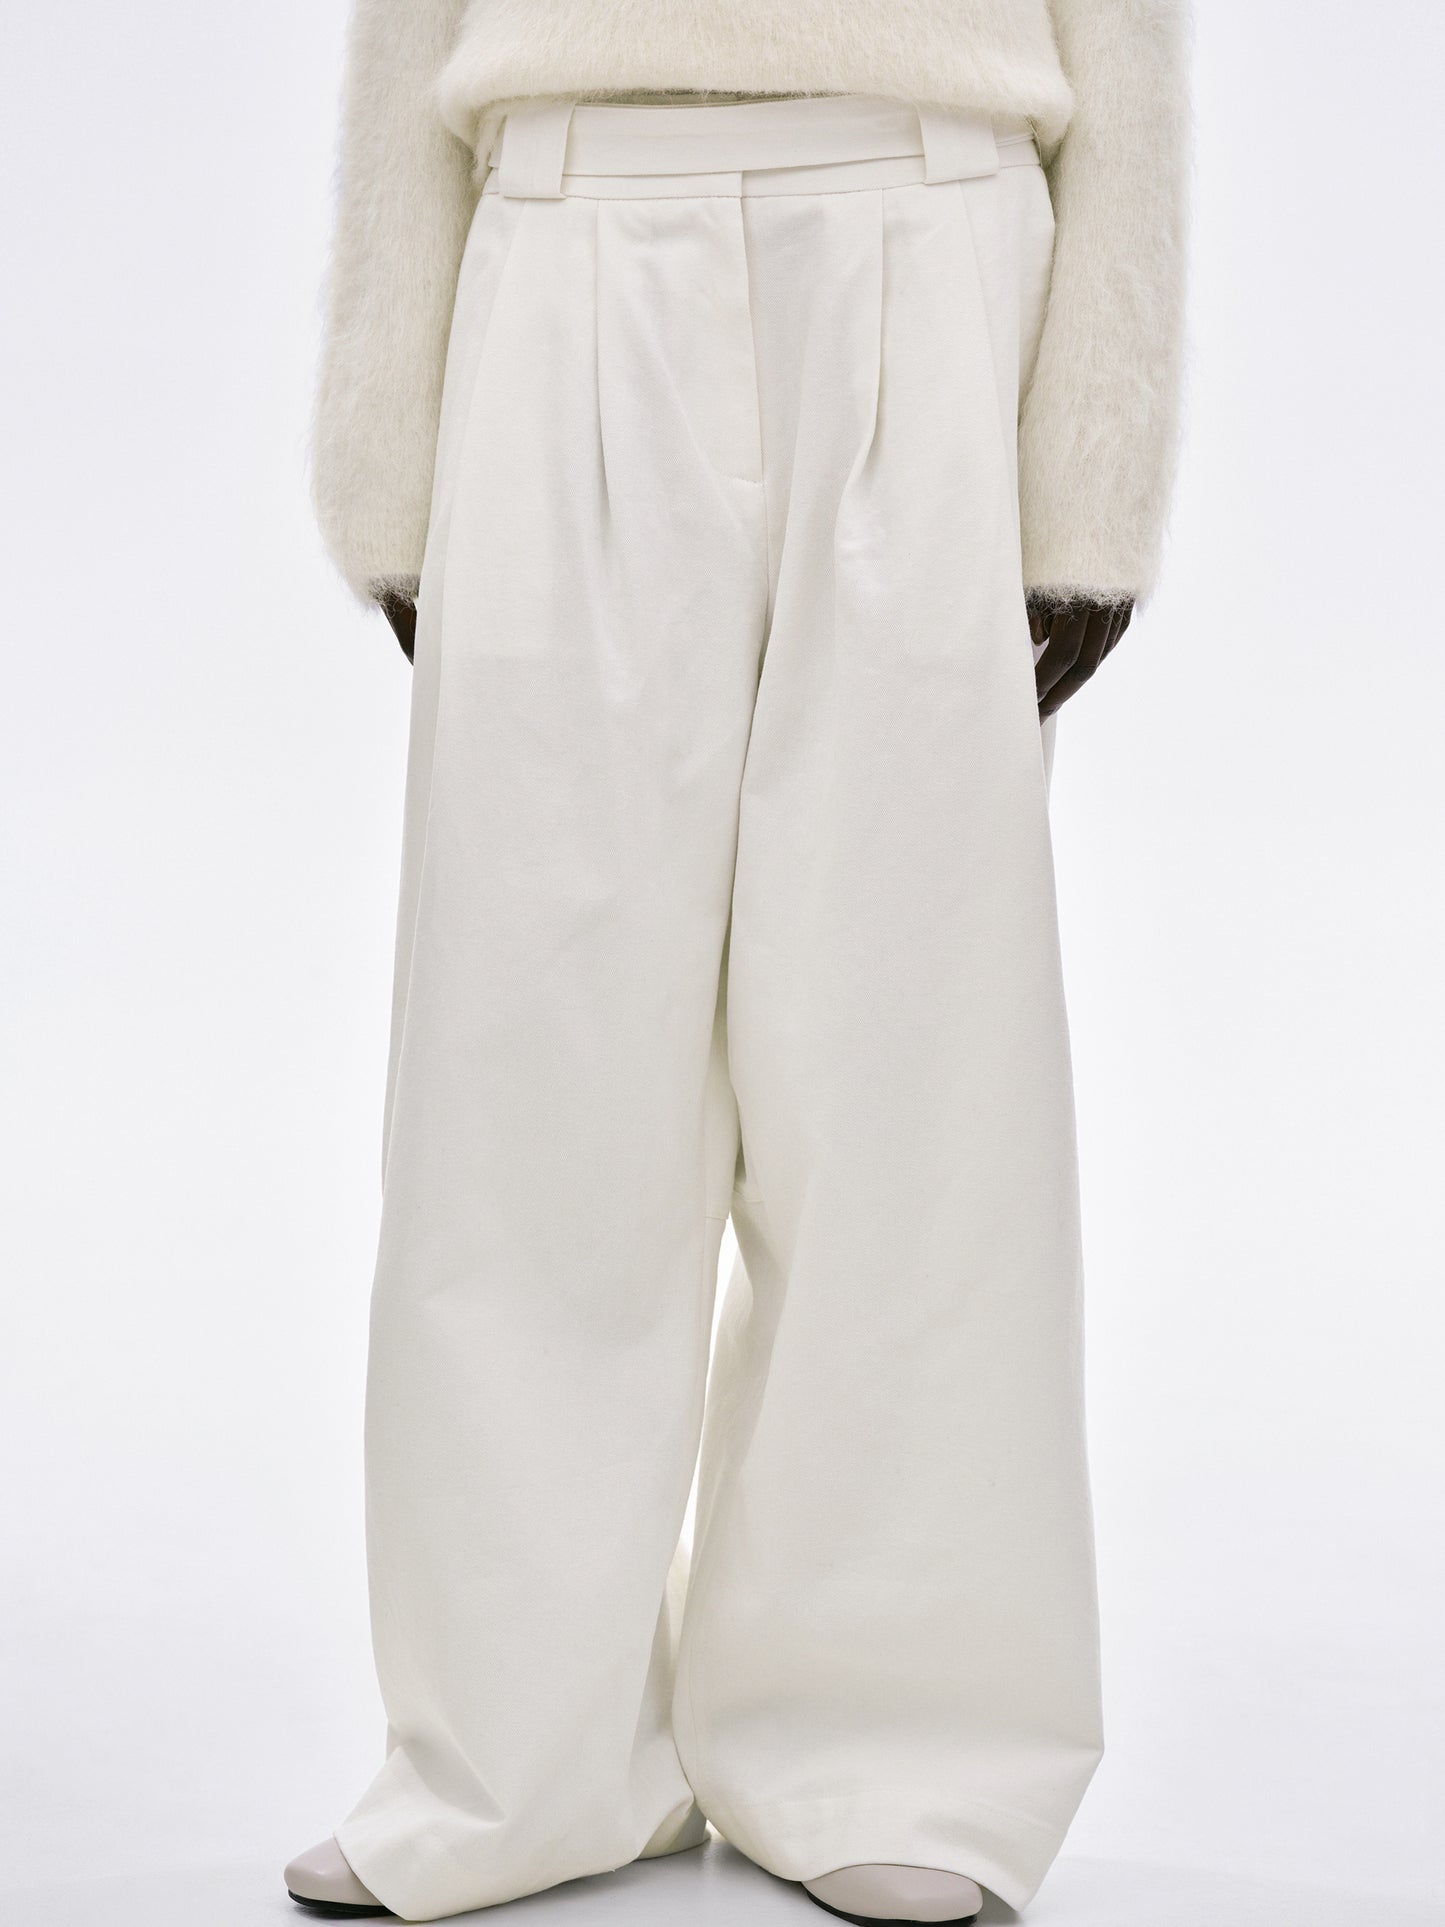 Belted Drop Pants, White